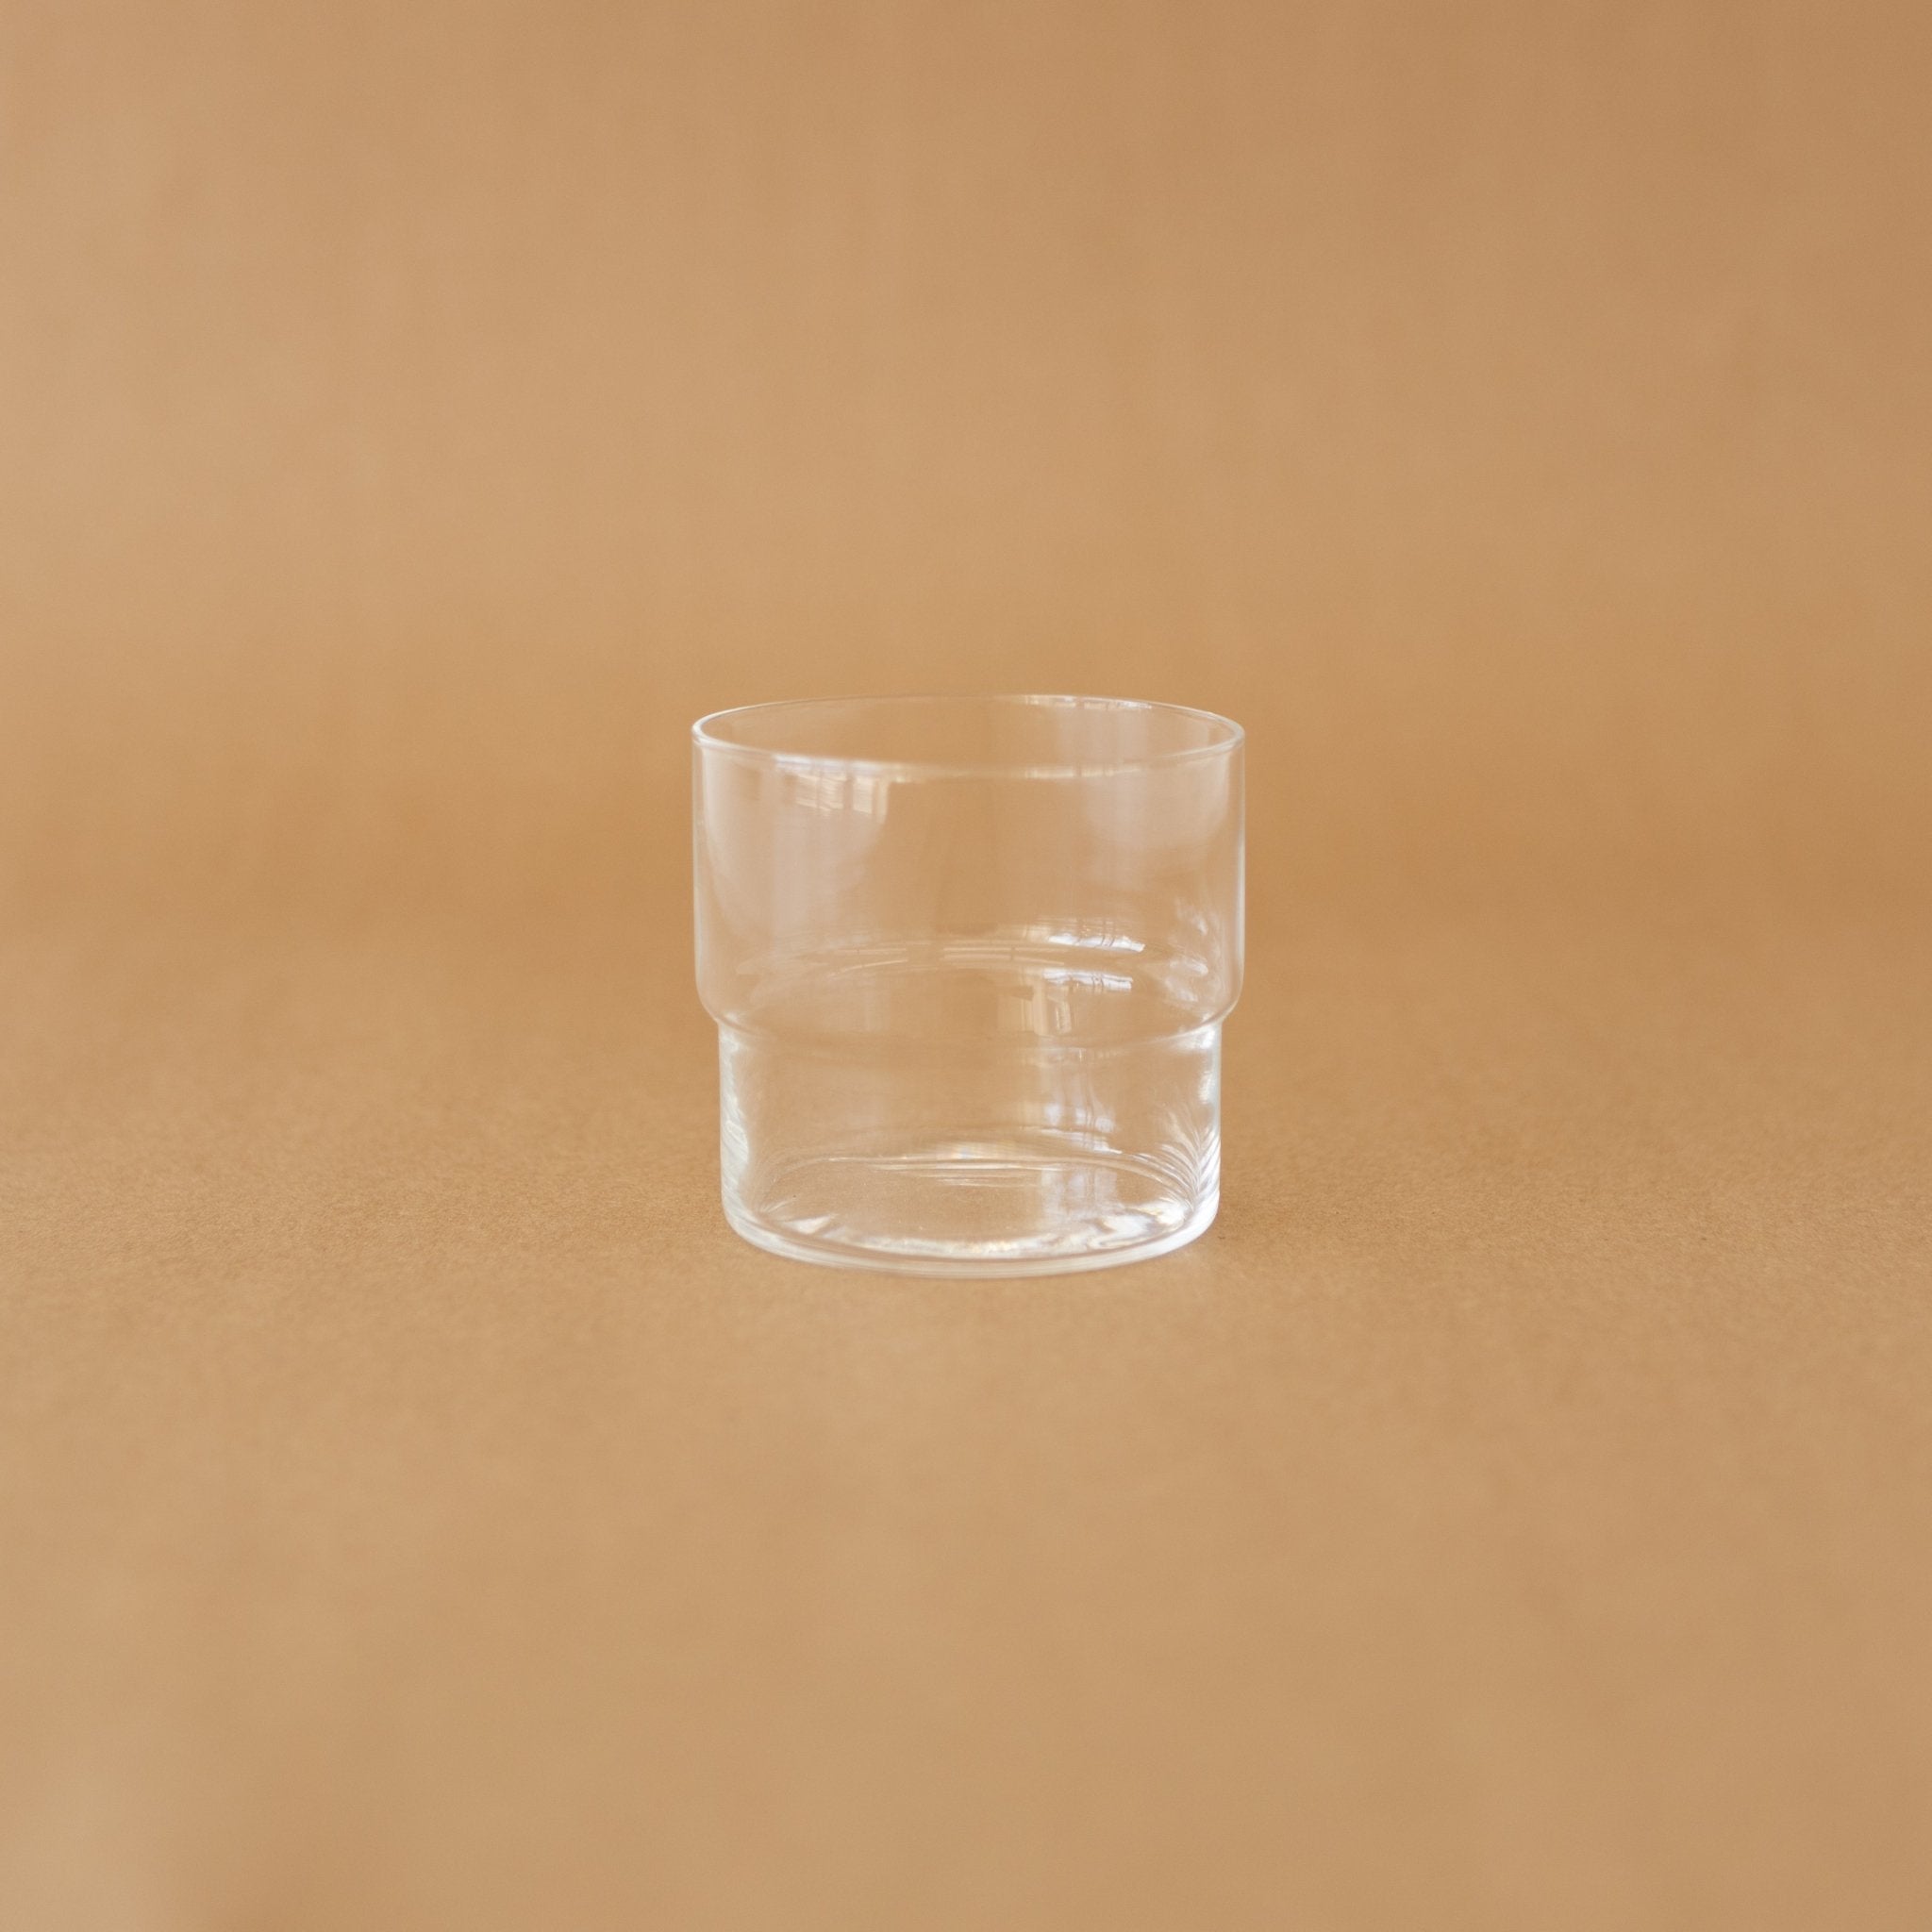 Japanese Stacking Glass